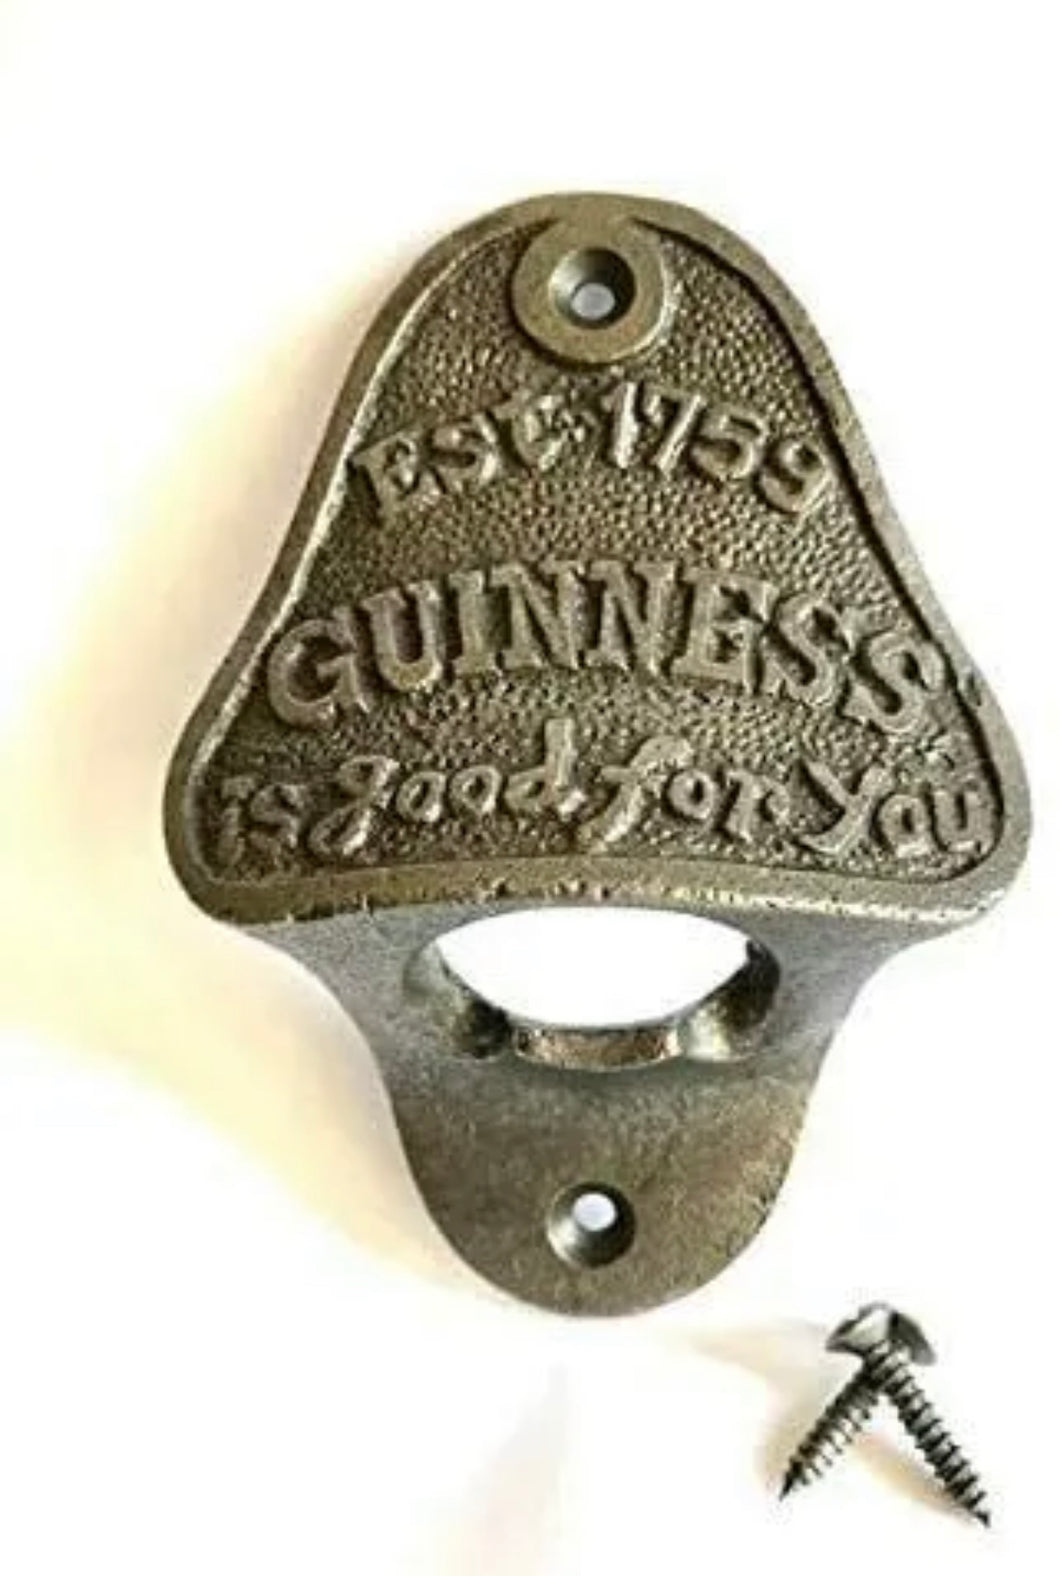 Retro Collections Guiness CAST Iron BAR Wall Mounted Bottle Opener